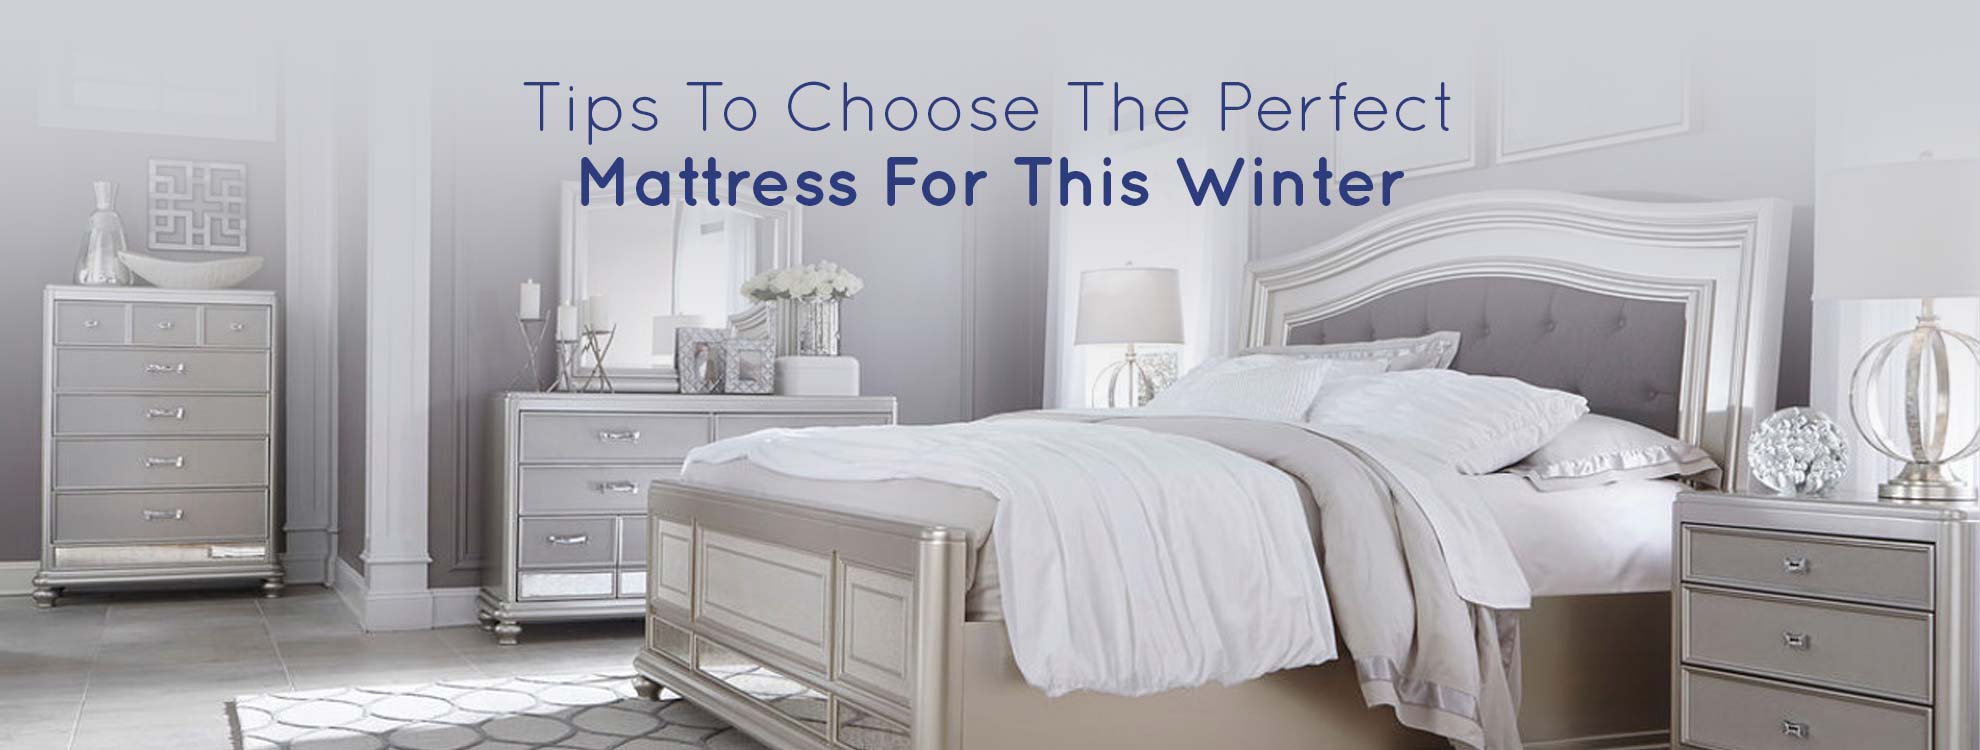 mattress for this winter